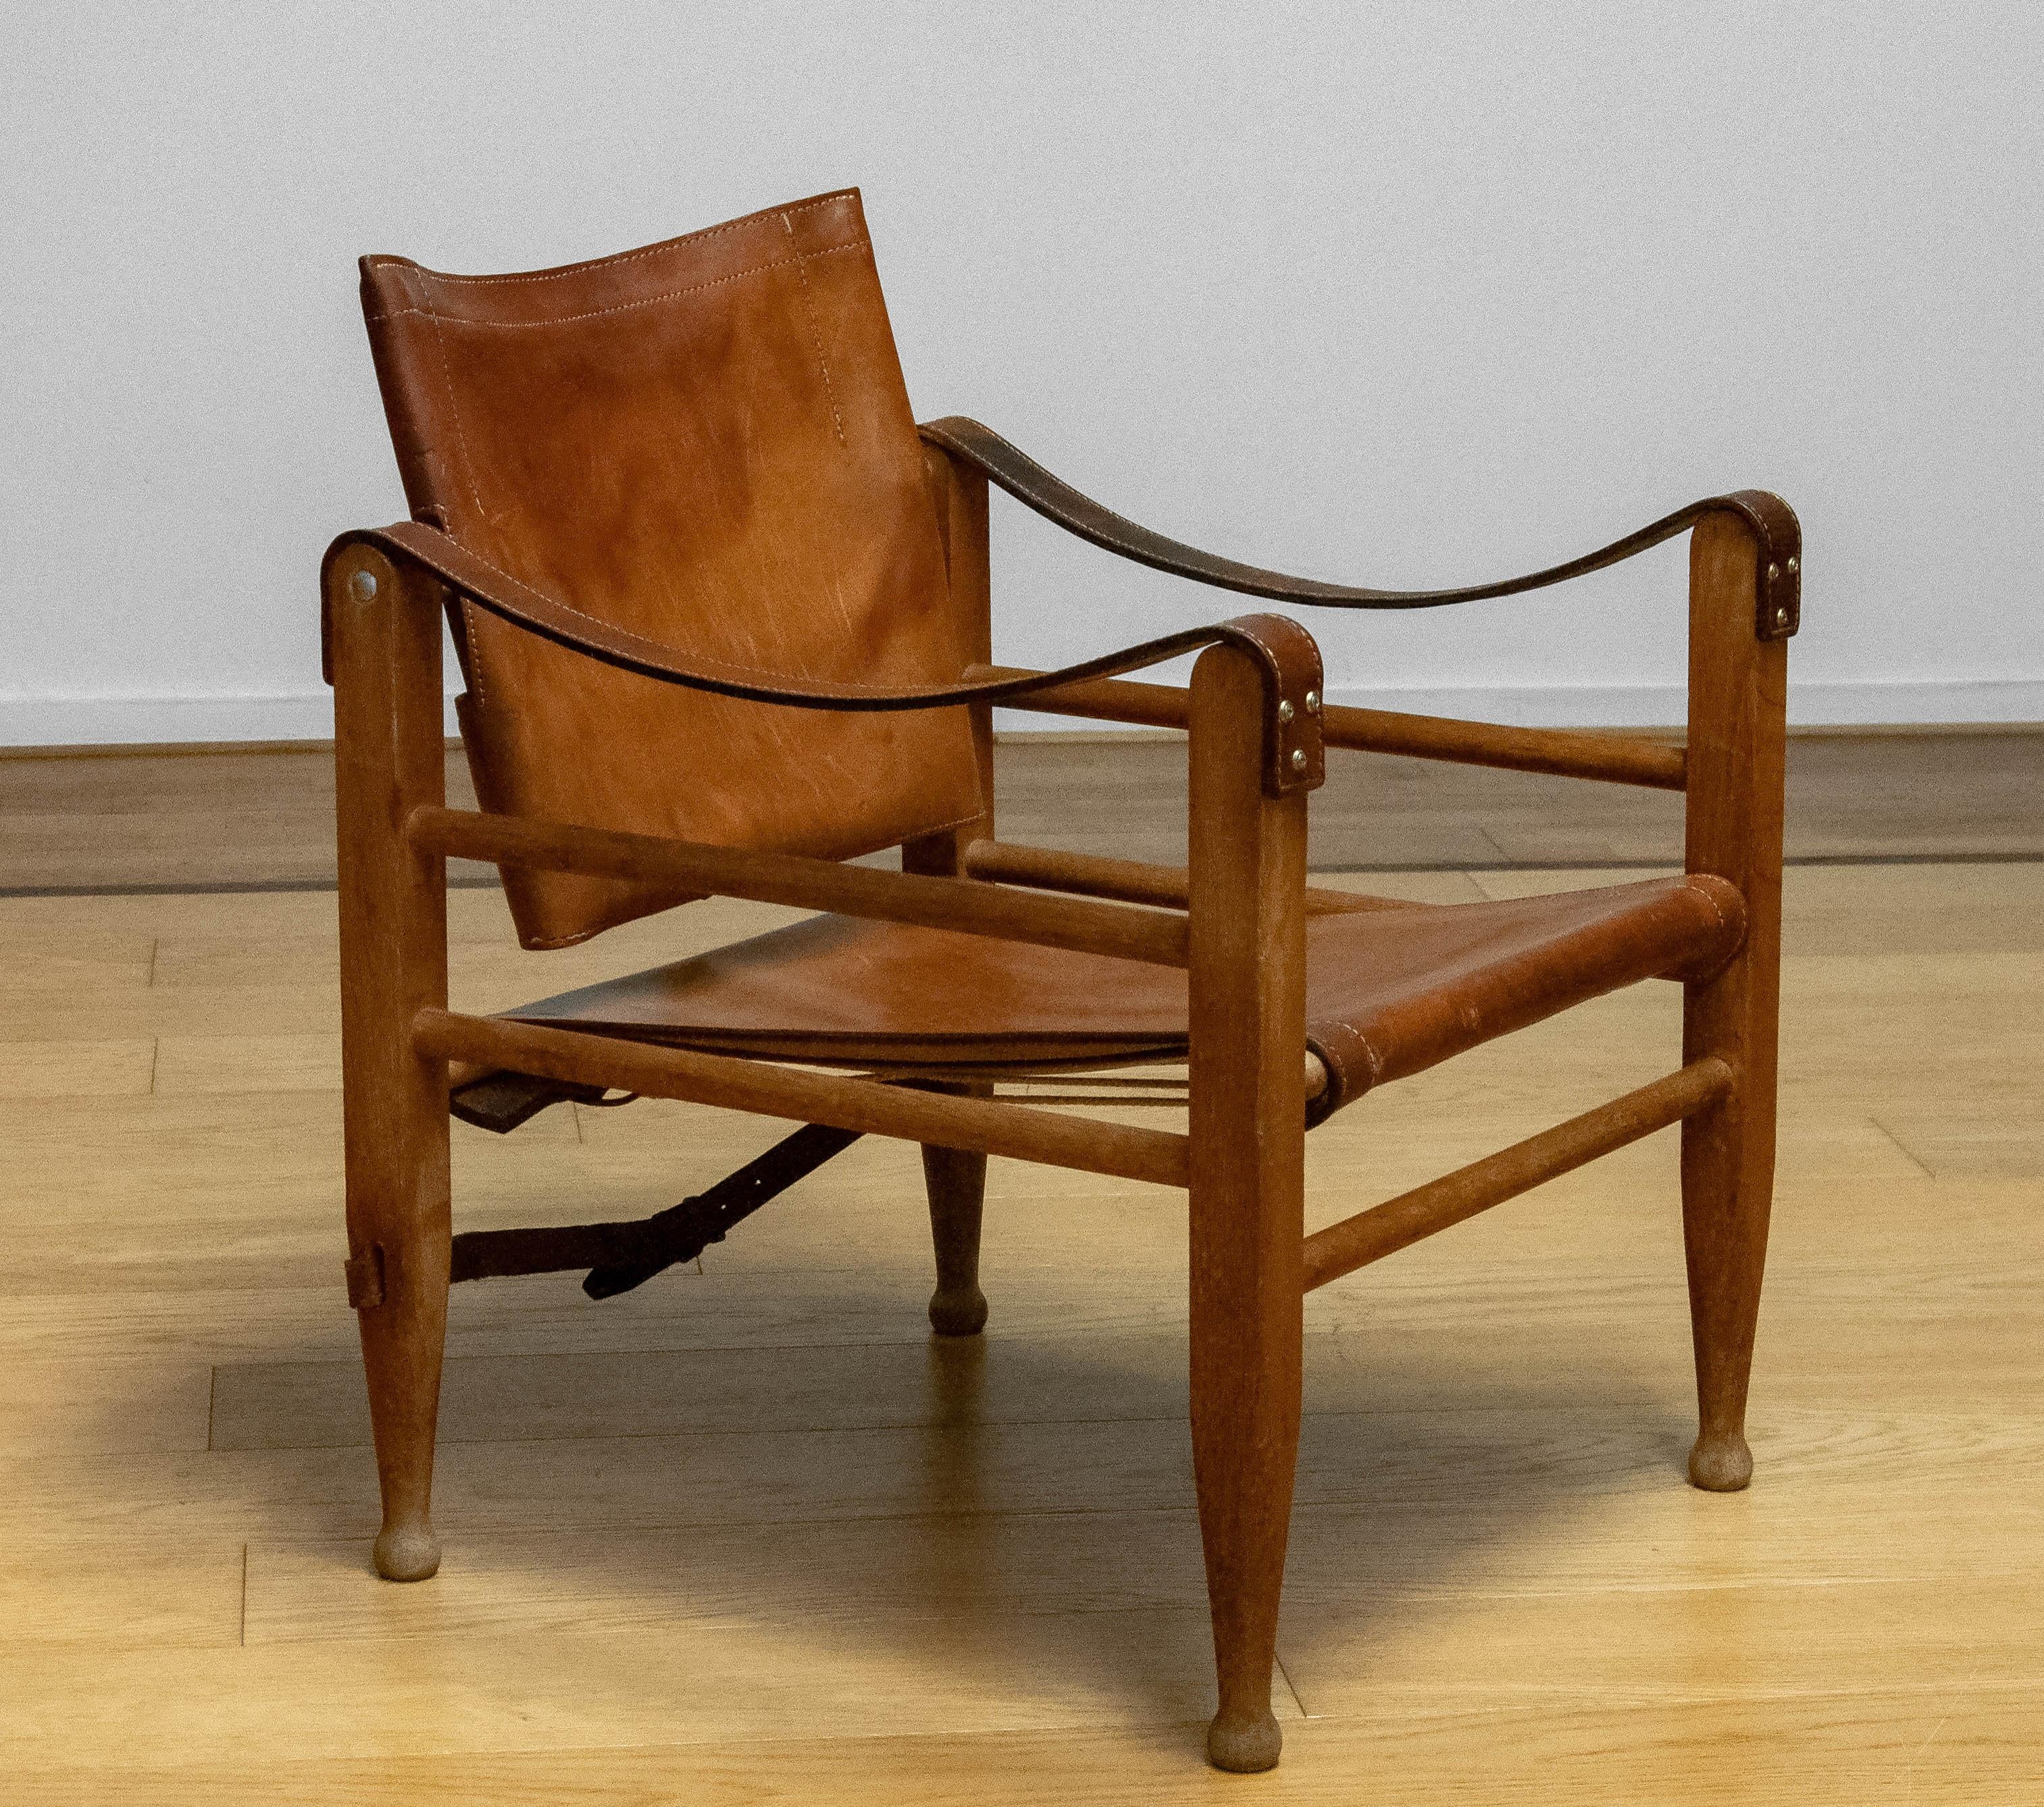 Beautiful safari chair designed by Aage Bruun & Son in Denmark in the 1960s. 
The chair has a wooden frame with cognac leather armrests, seat and backrest. 
The chair is glued and therefore cannot be taken apart. 
Belt repaired between the rear legs